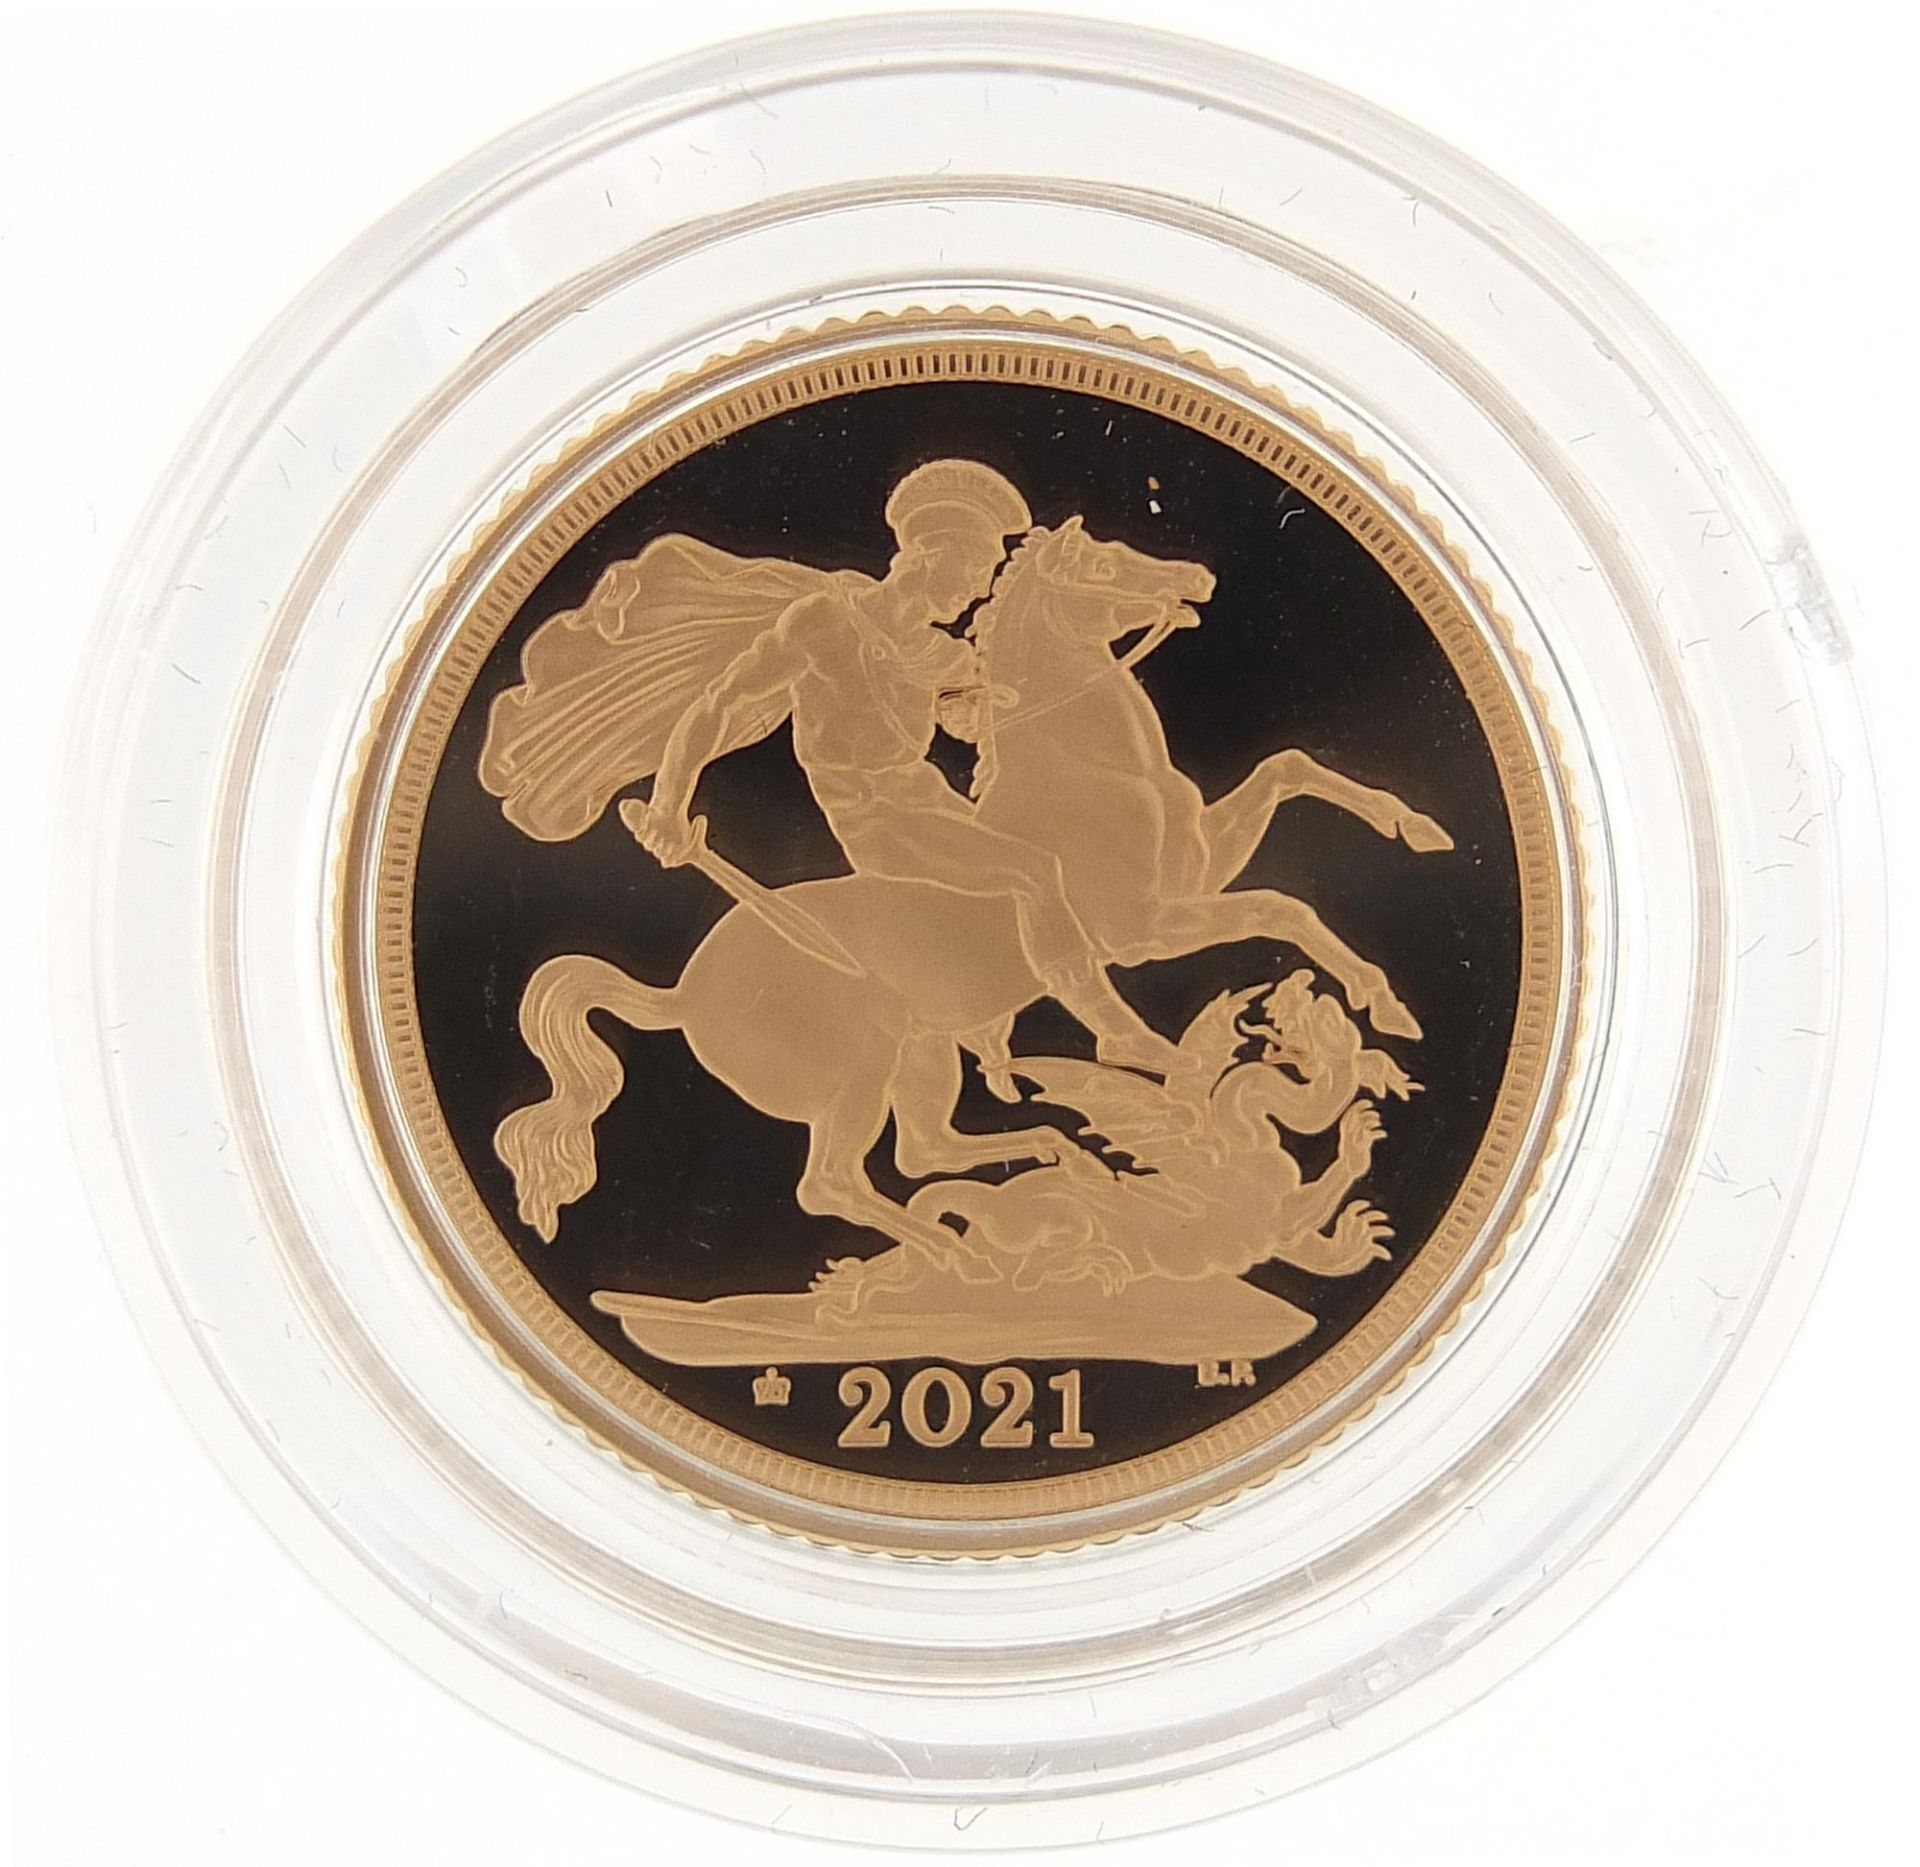 Elizabeth II 2021 gold proof sovereign with box and certificate, 6767/7995 - this lot is sold - Image 2 of 4